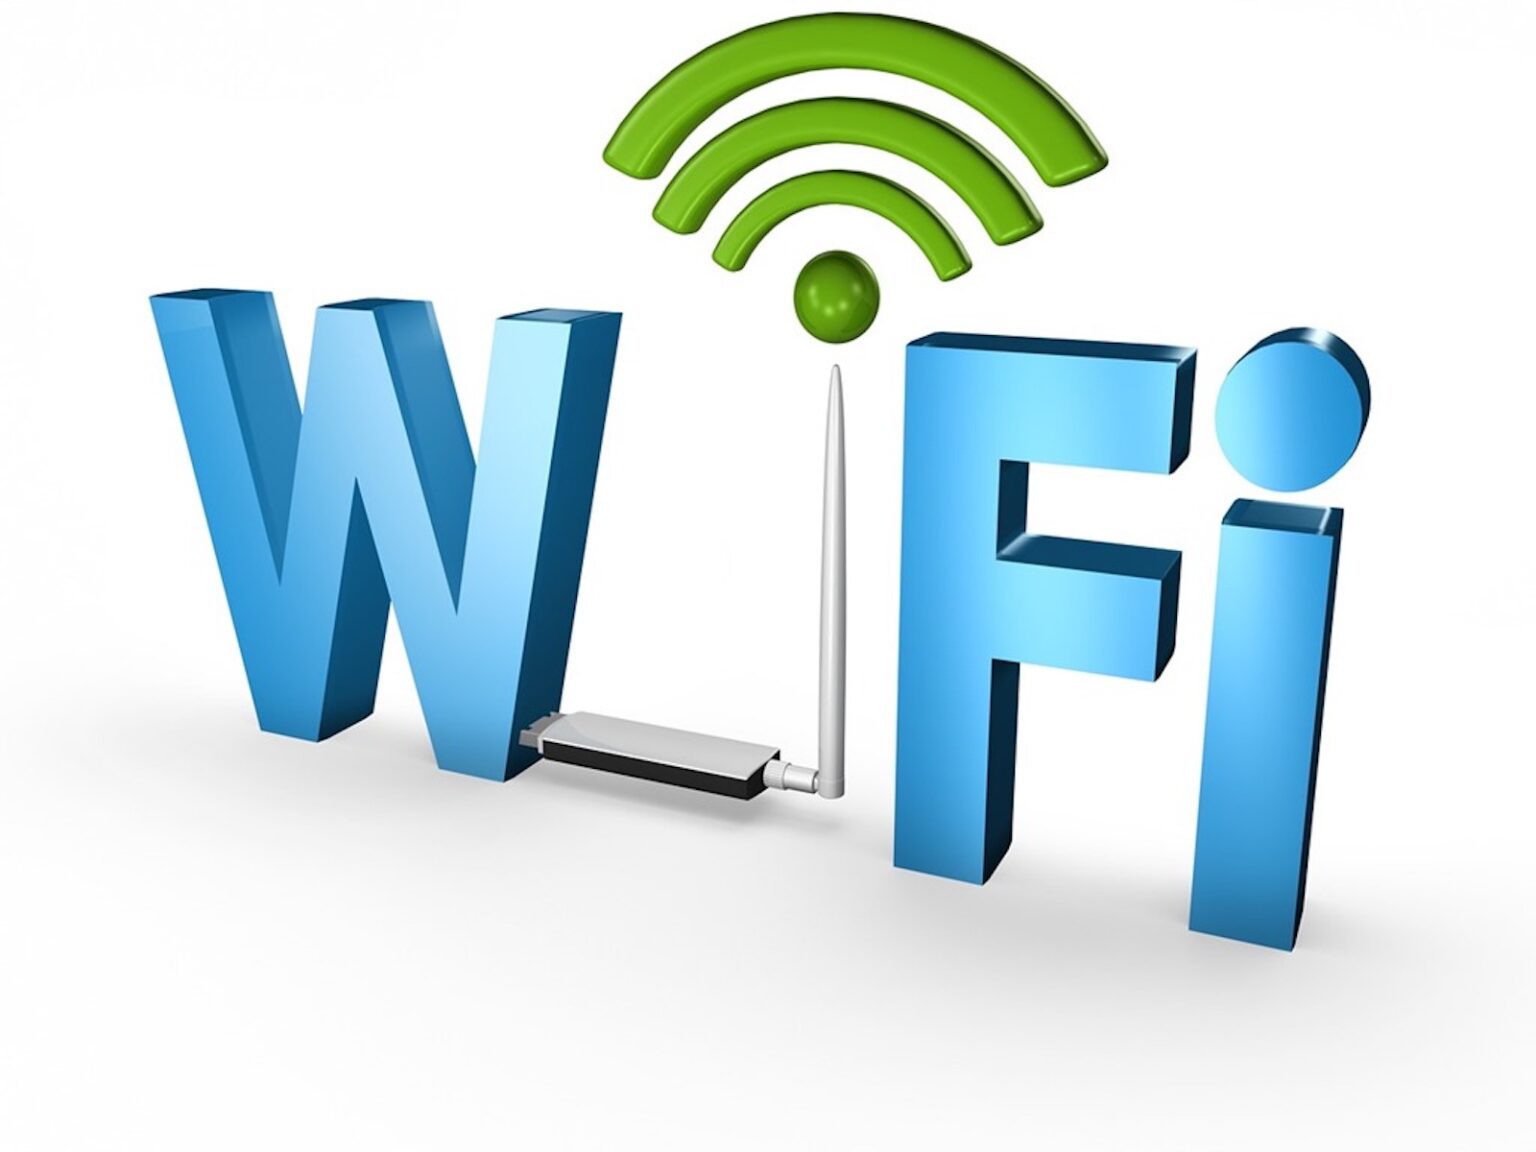 When comparing Wi-Fi and LiFi, it's tough to pick one over the other because each has its own set of benefits and drawbacks. Here's why.